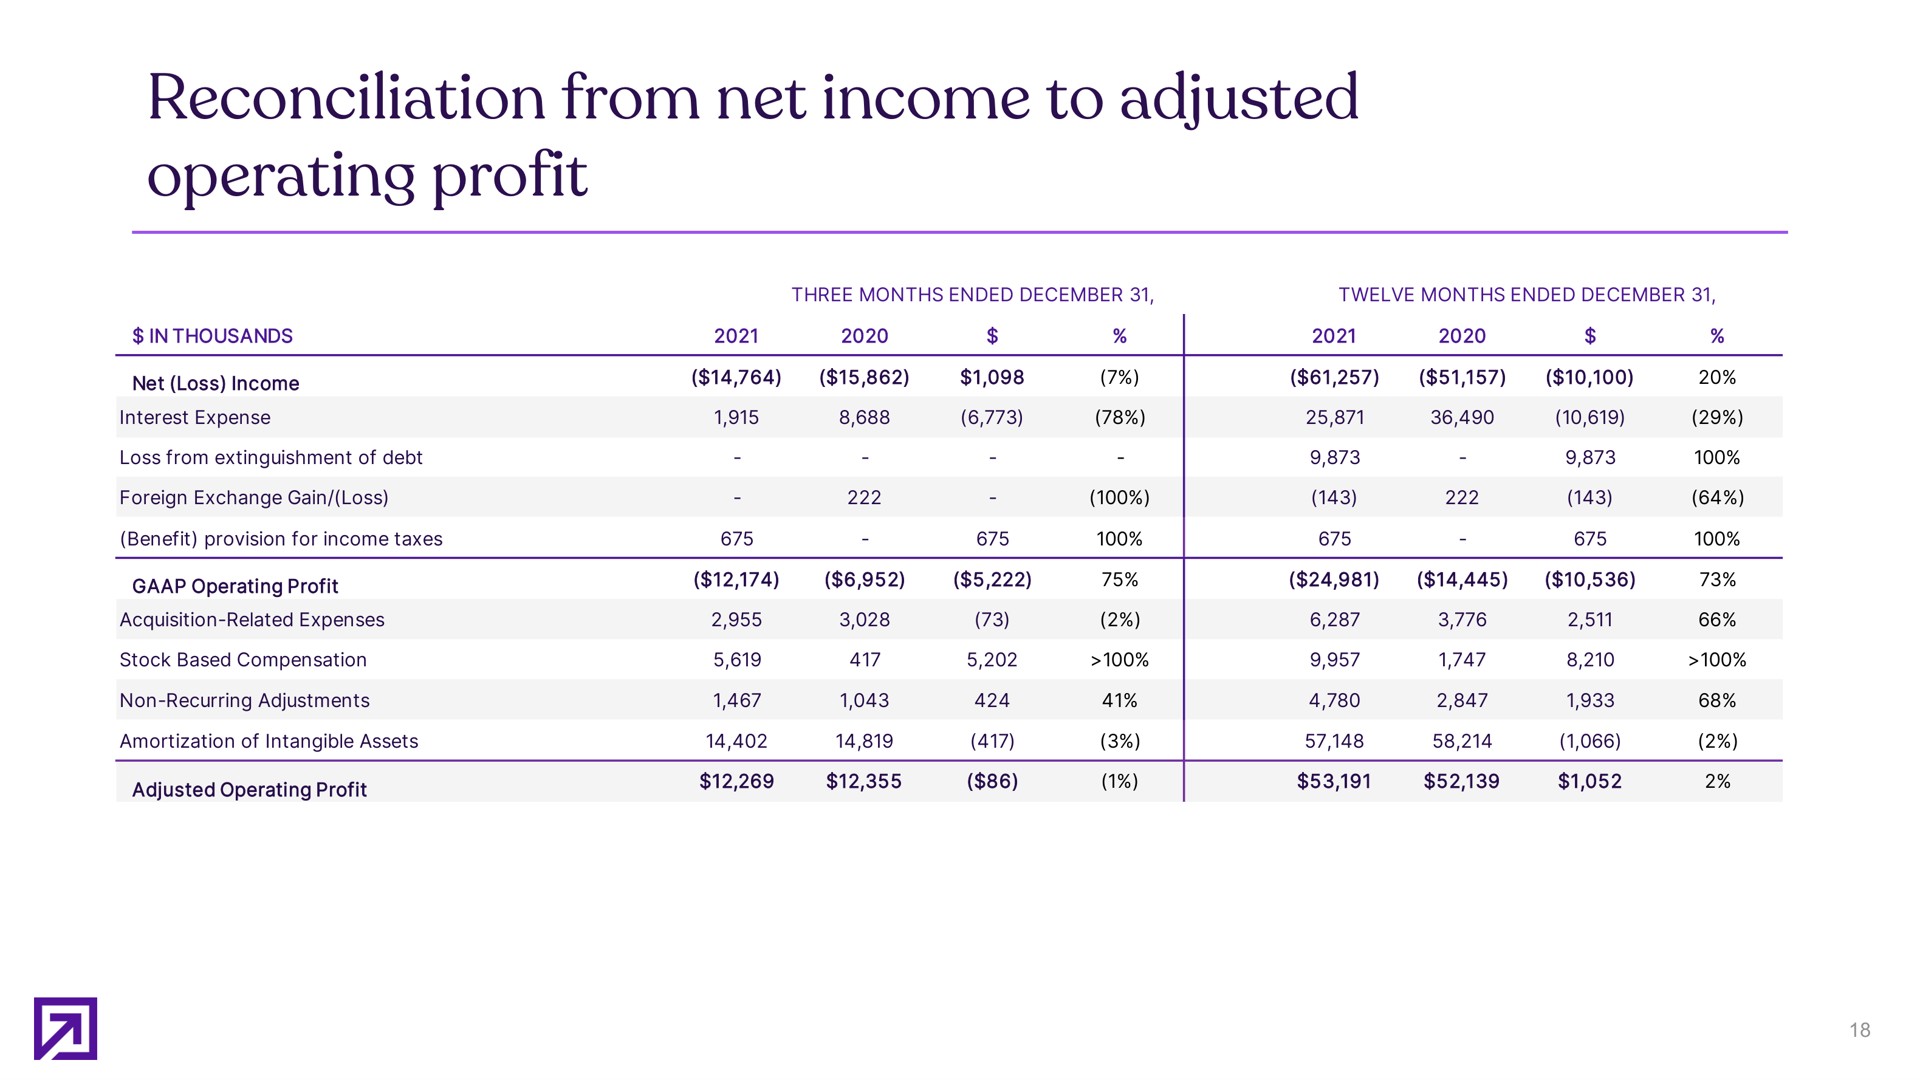 reconciliation from net income to adjusted operating profit | Definitive Healthcare